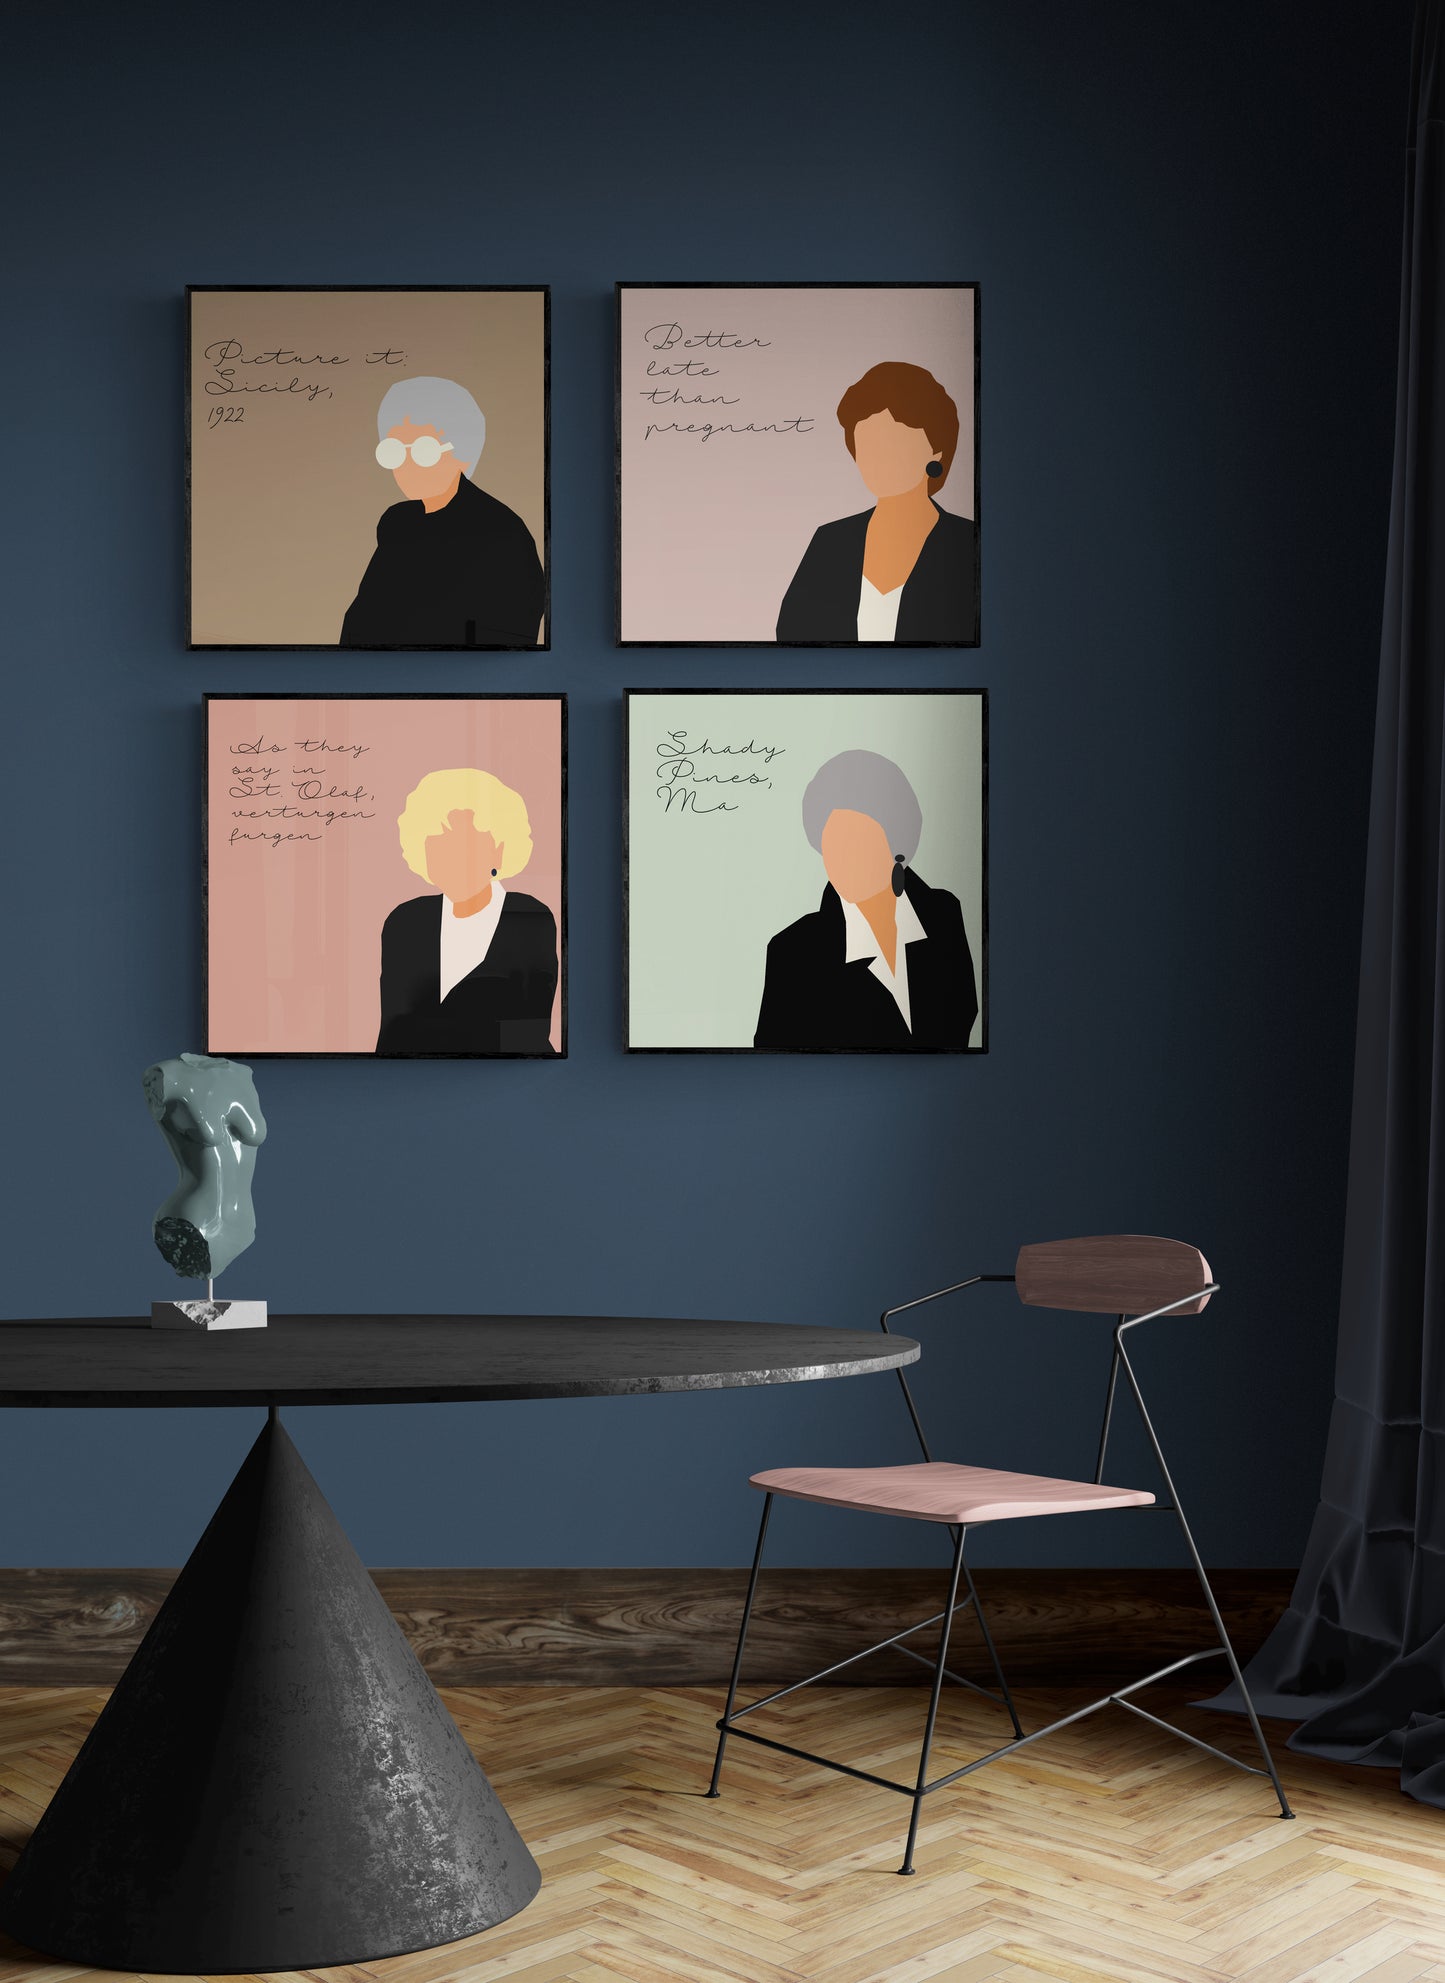 Golden Girls Art Portraits featuring Dorothy, Rose, Blanche, and Sophia in neutral, pastel colors